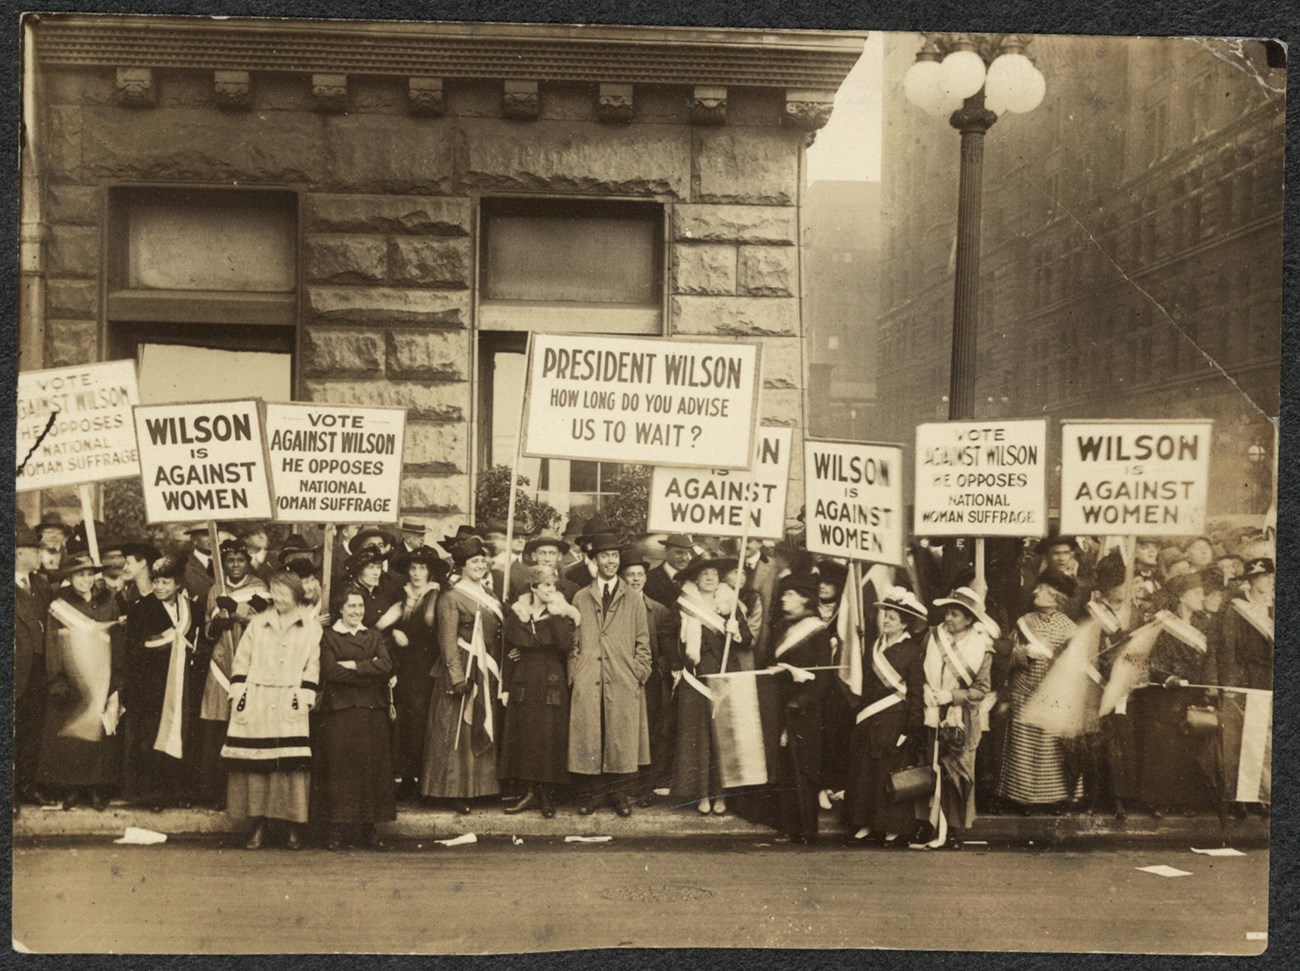 Suffragists demonstrating against Woodrow Wilson in Chicago, 1916. Library of Congress, Records of the National Woman's Party https://www.loc.gov/resource/mnwp.276016